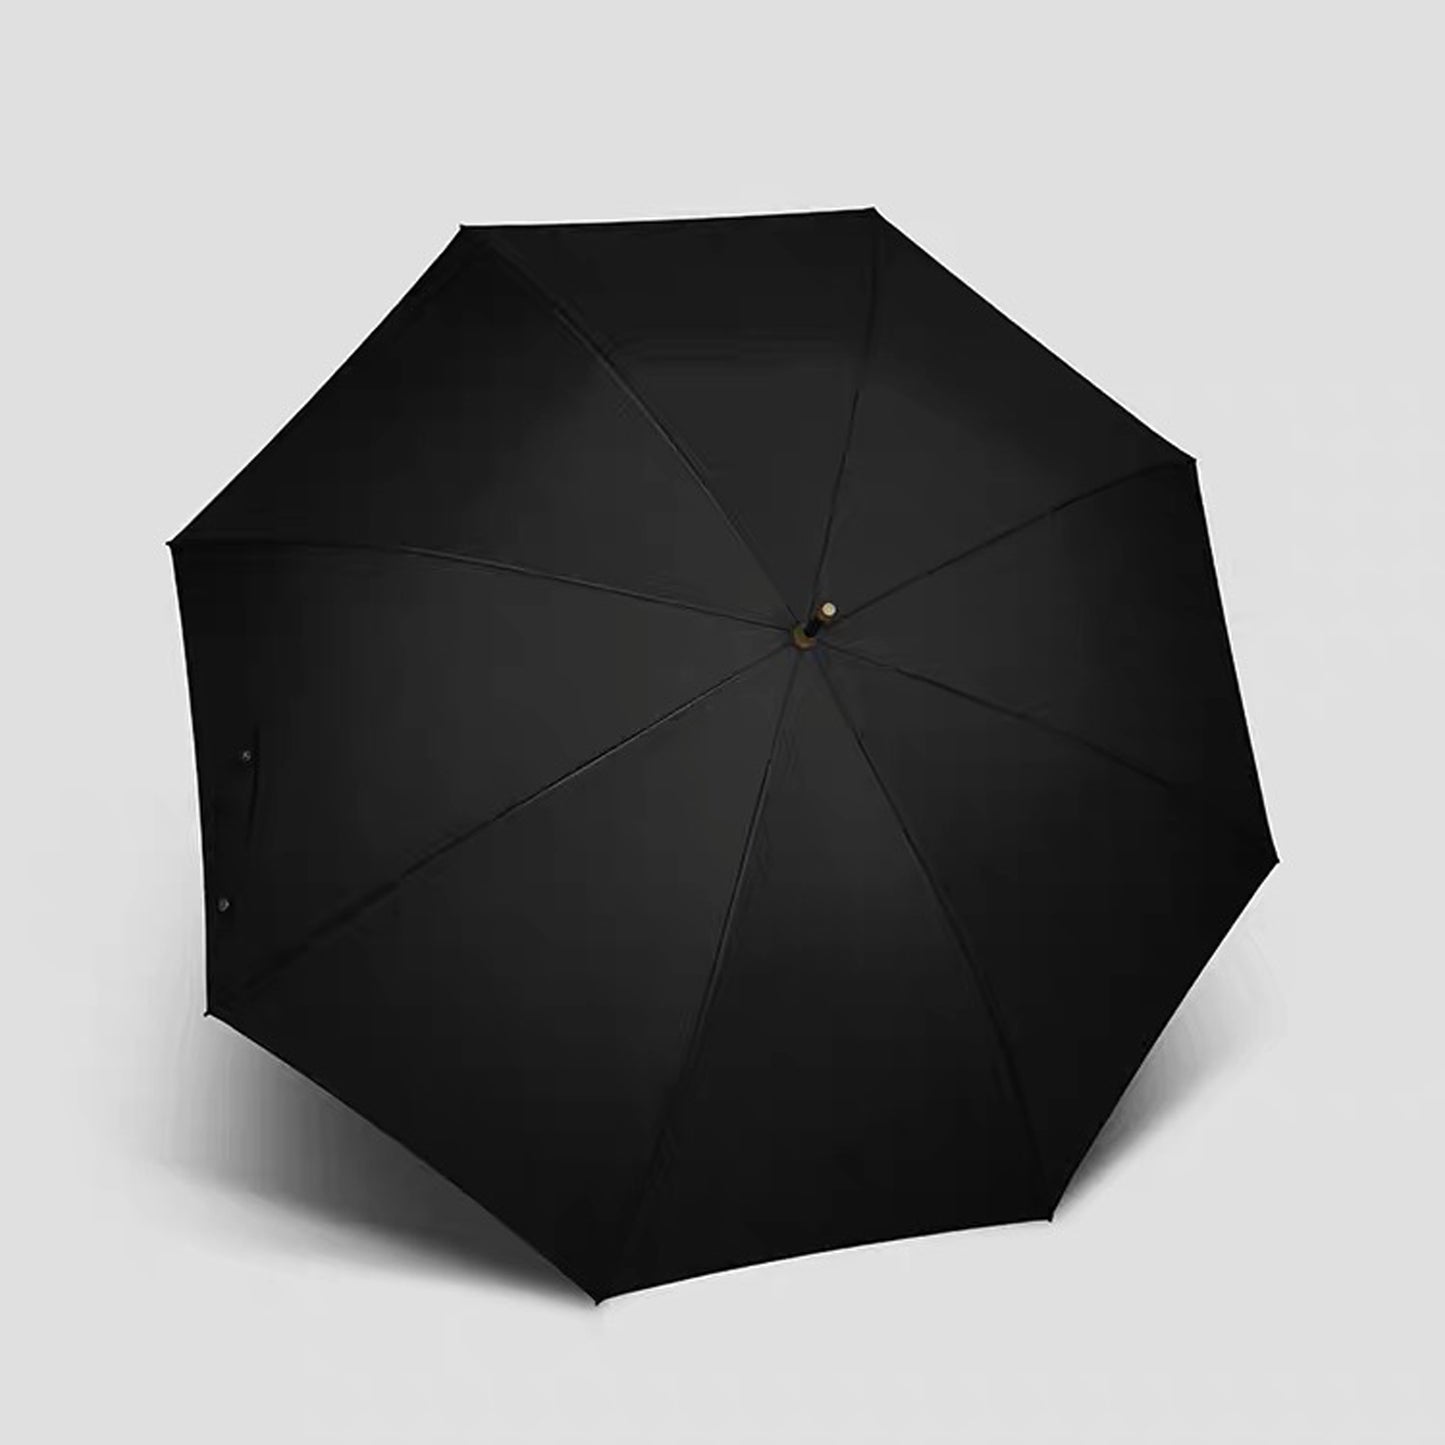 Xtra Large Family Umbrella for Dad